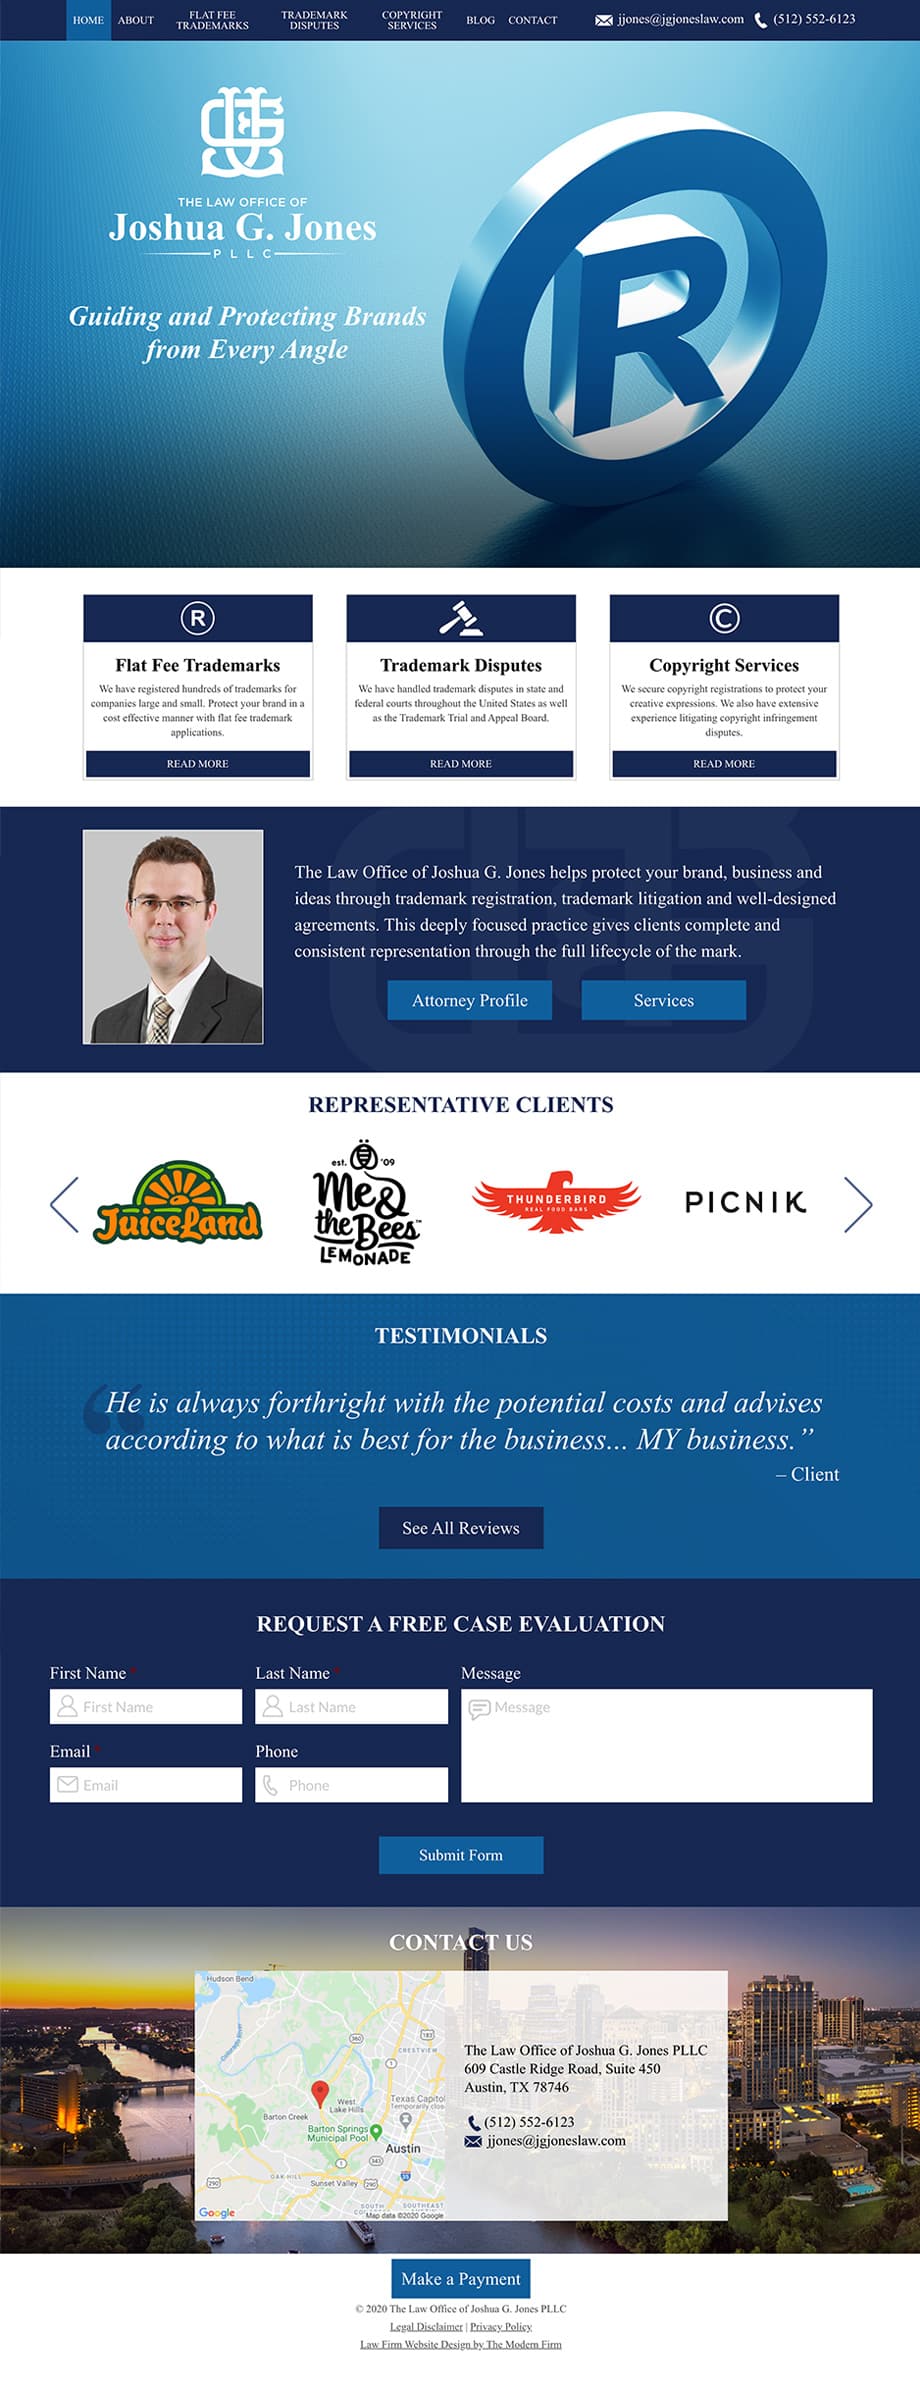 Law Firm Website for The Law Office of Joshua G. Jones PLLC